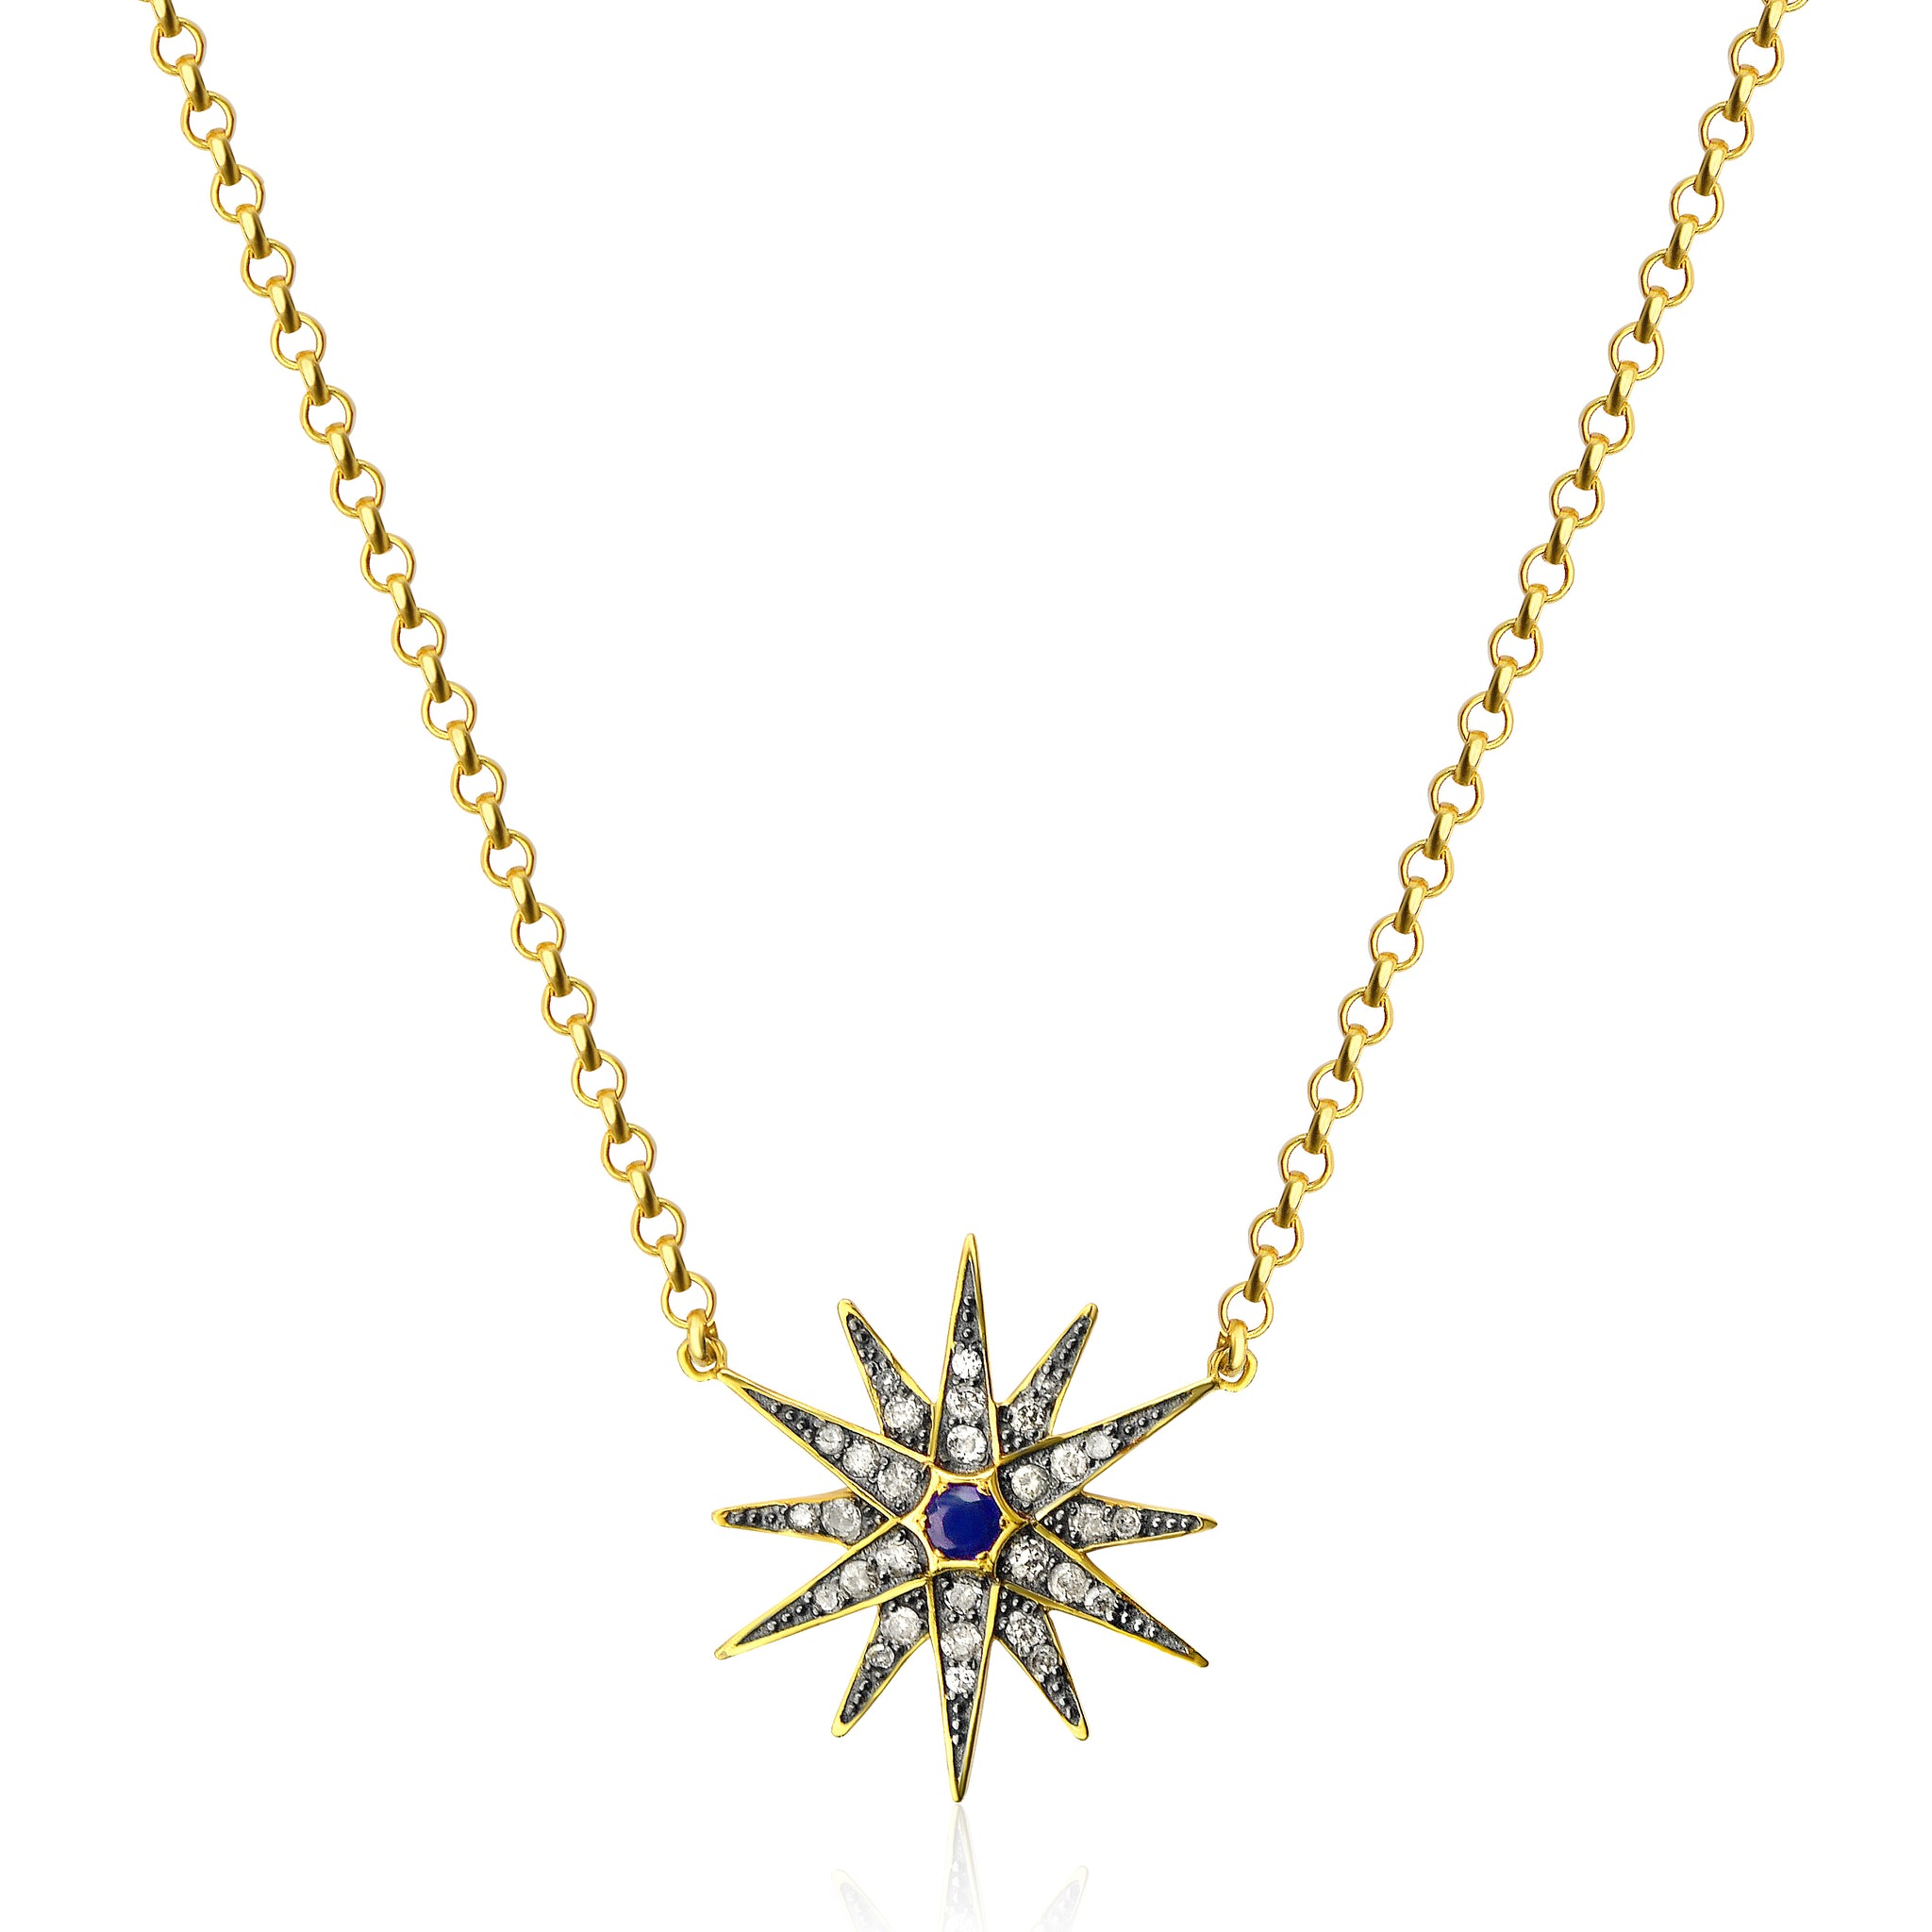 The Ophelia Necklace - Diamond and Sapphire Star